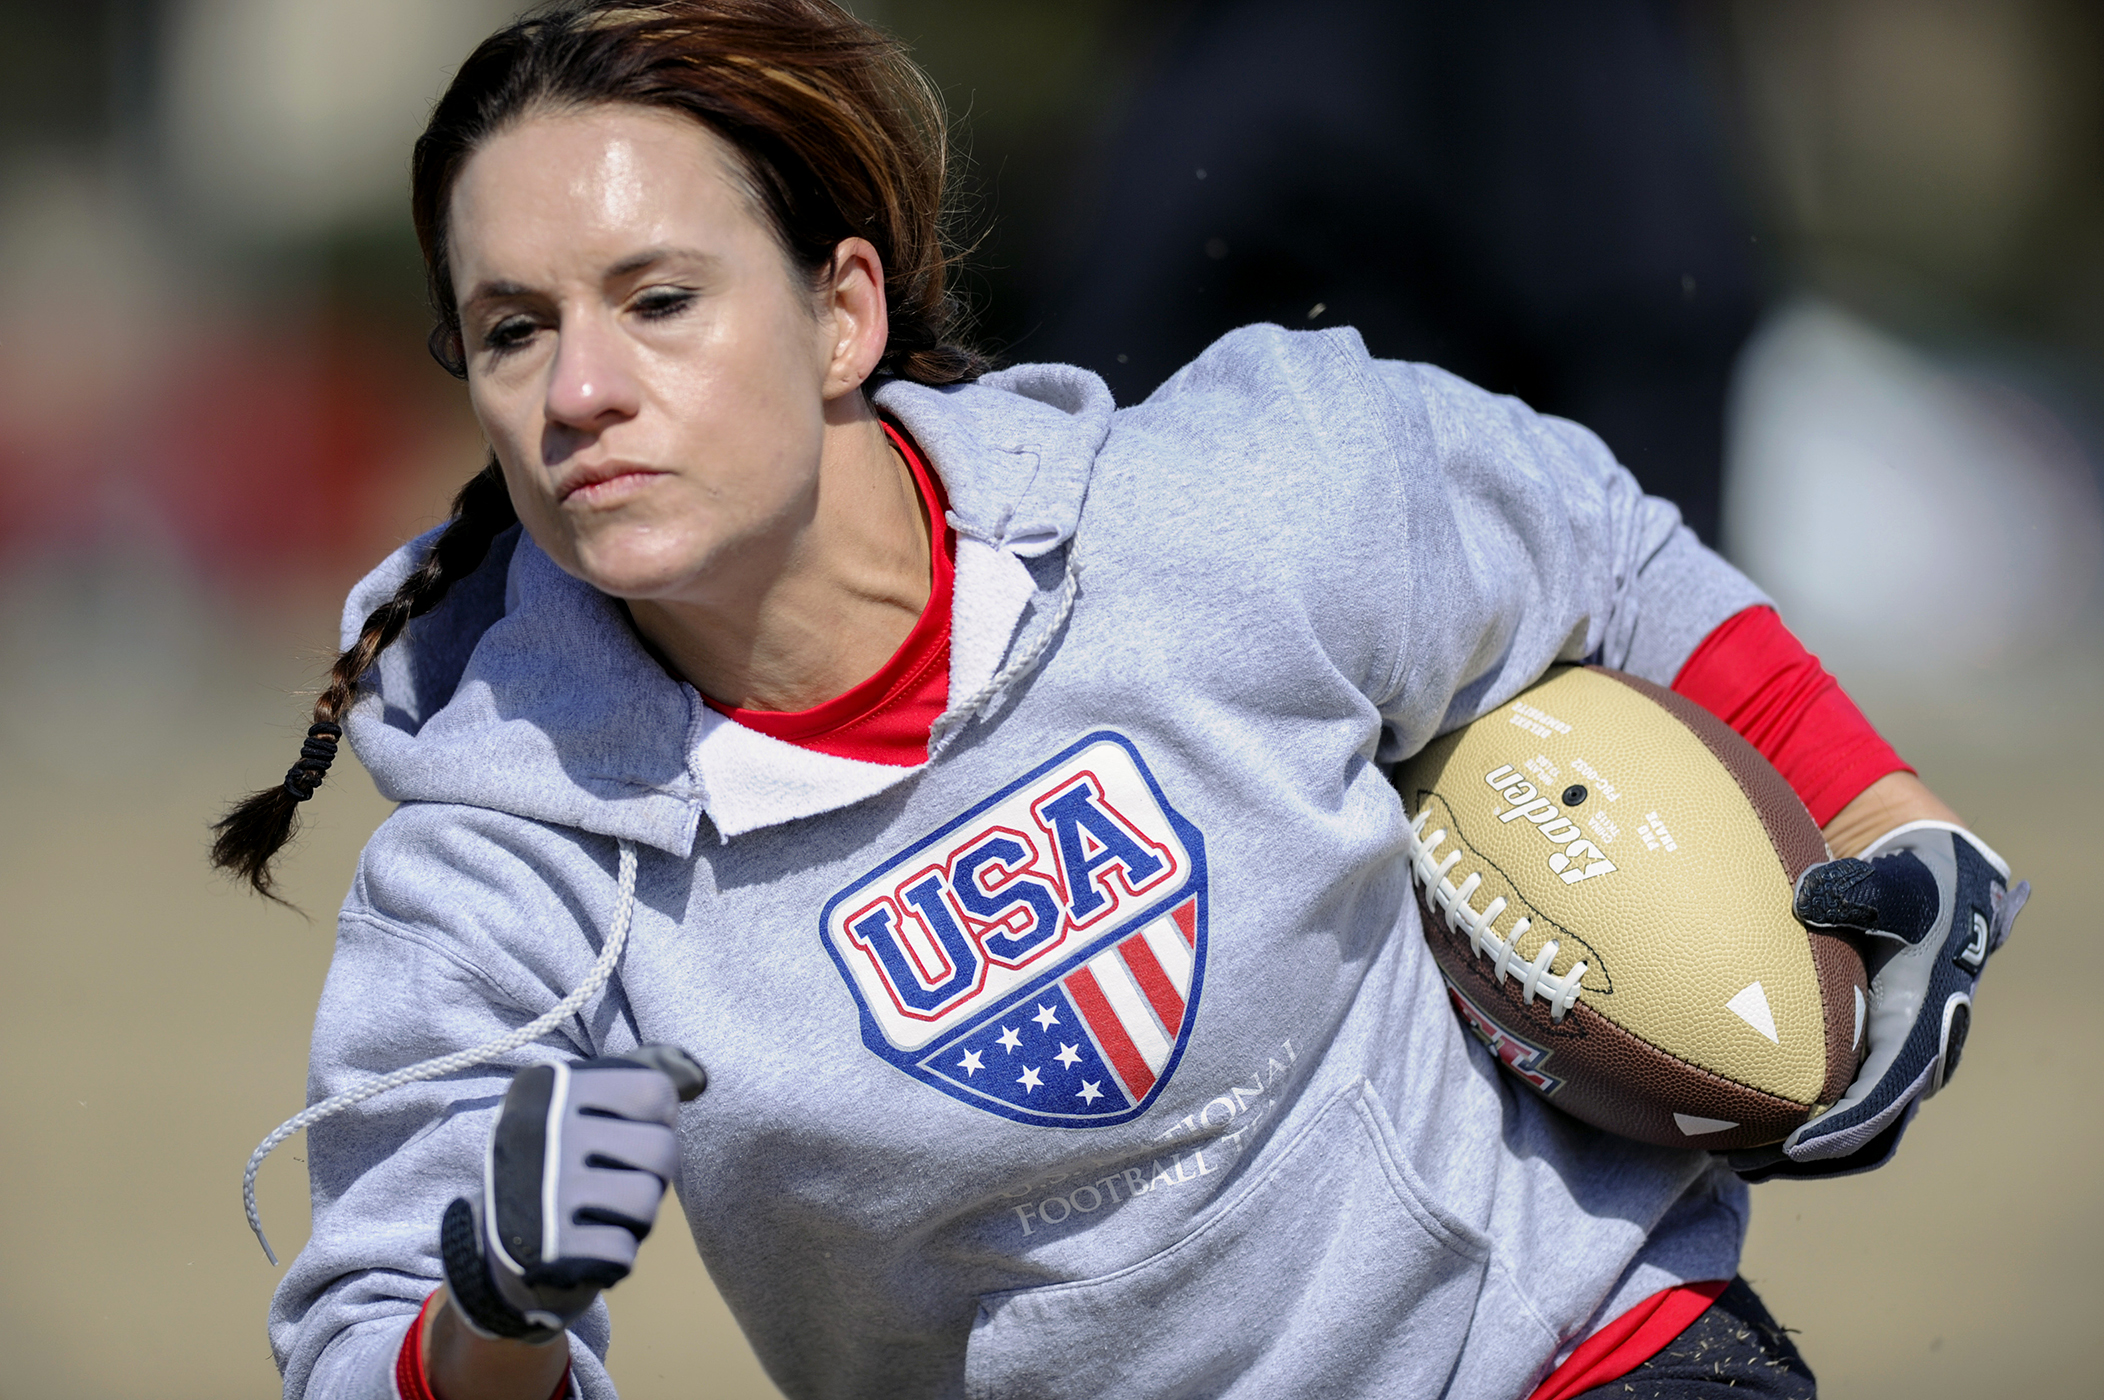 Arizona Cardinals hire first female coach in NFL history: Jen Welter